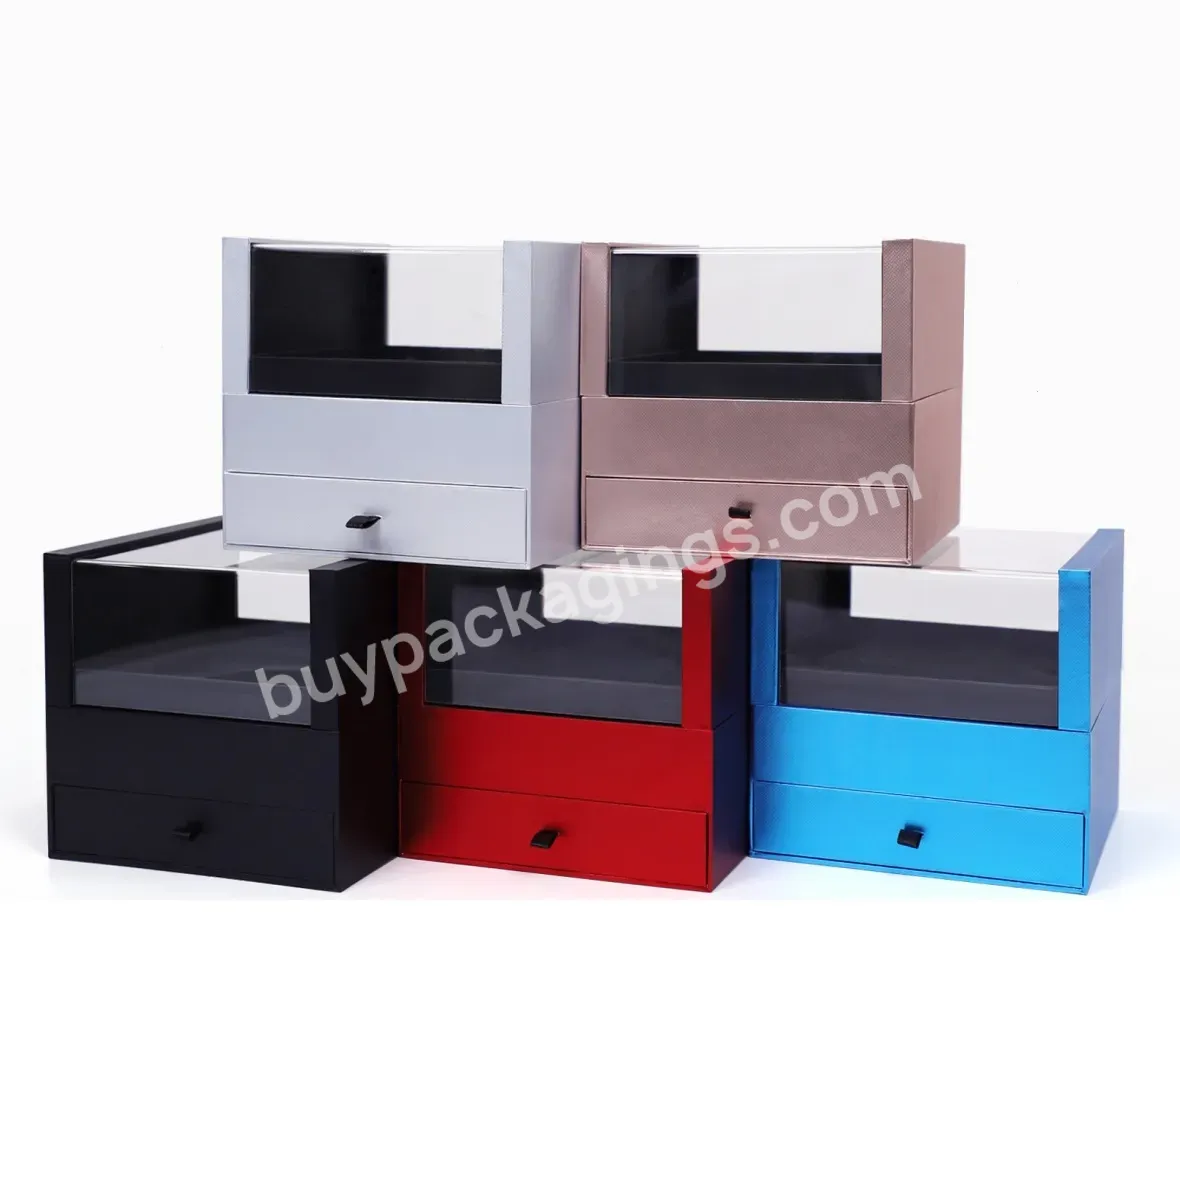 Luxury Square Acrylic Box Flower Gift Box Full View Gift Box With Drawer Design - Buy Square Acrylic Box,Flower Gift Box,Full View Gift Box With Drawer Design.